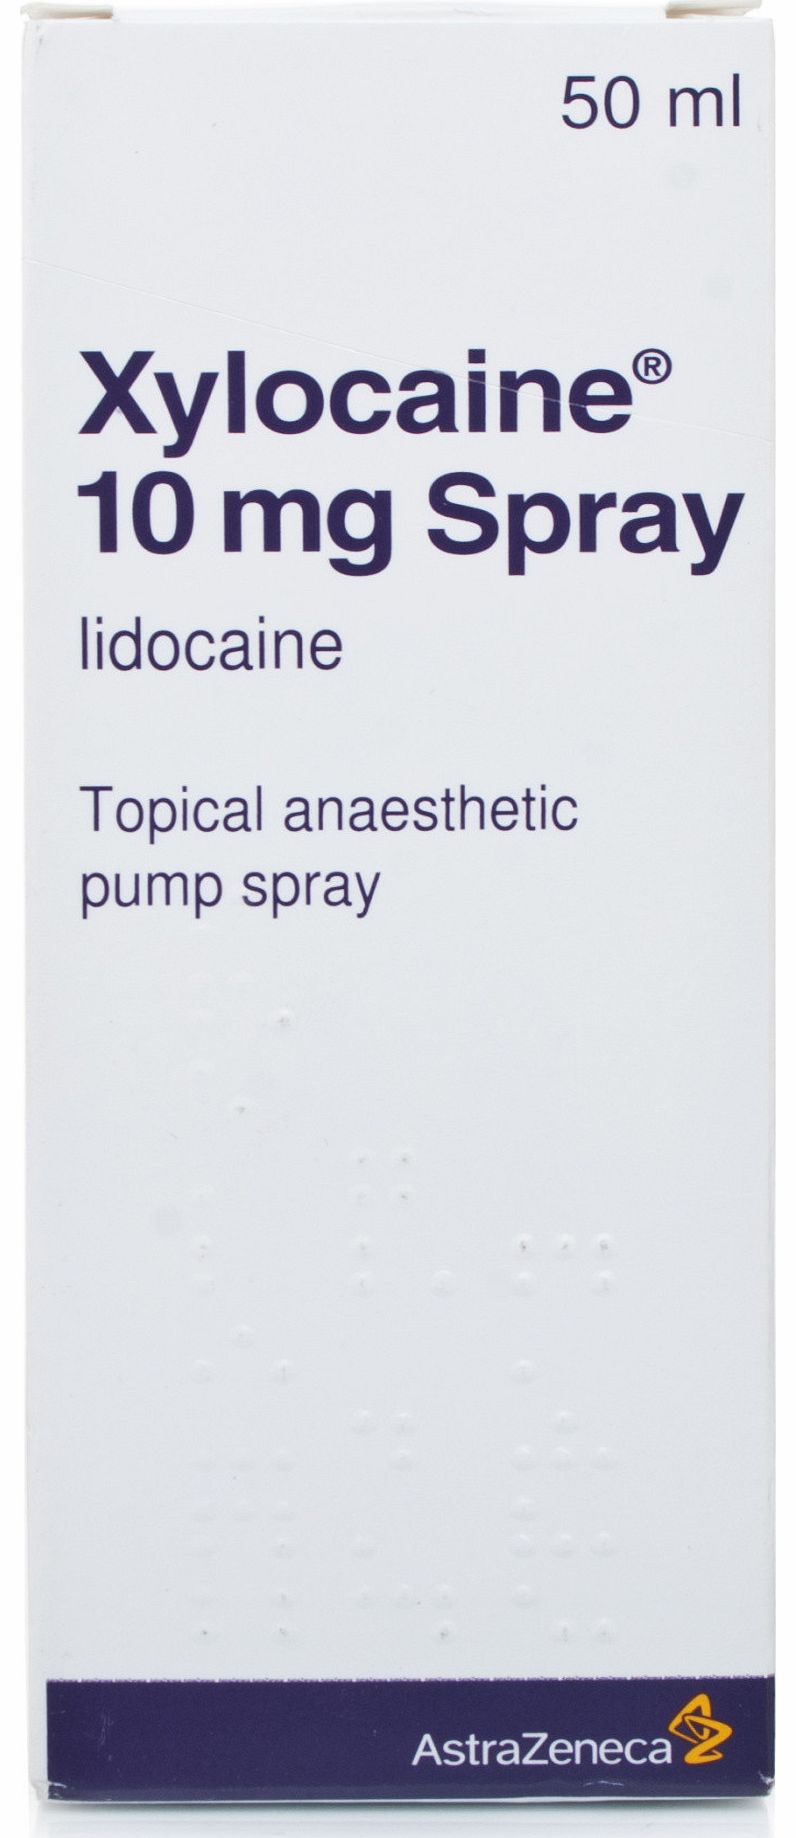 Xylocaine 10mg Anaesthetic Spray can be used to numb your mouth during dentist treatments and medical examinations and operations. It contains an active ingredient called Lidocaine which is an local anaesthetic used to numb chosen areas - to relieve 